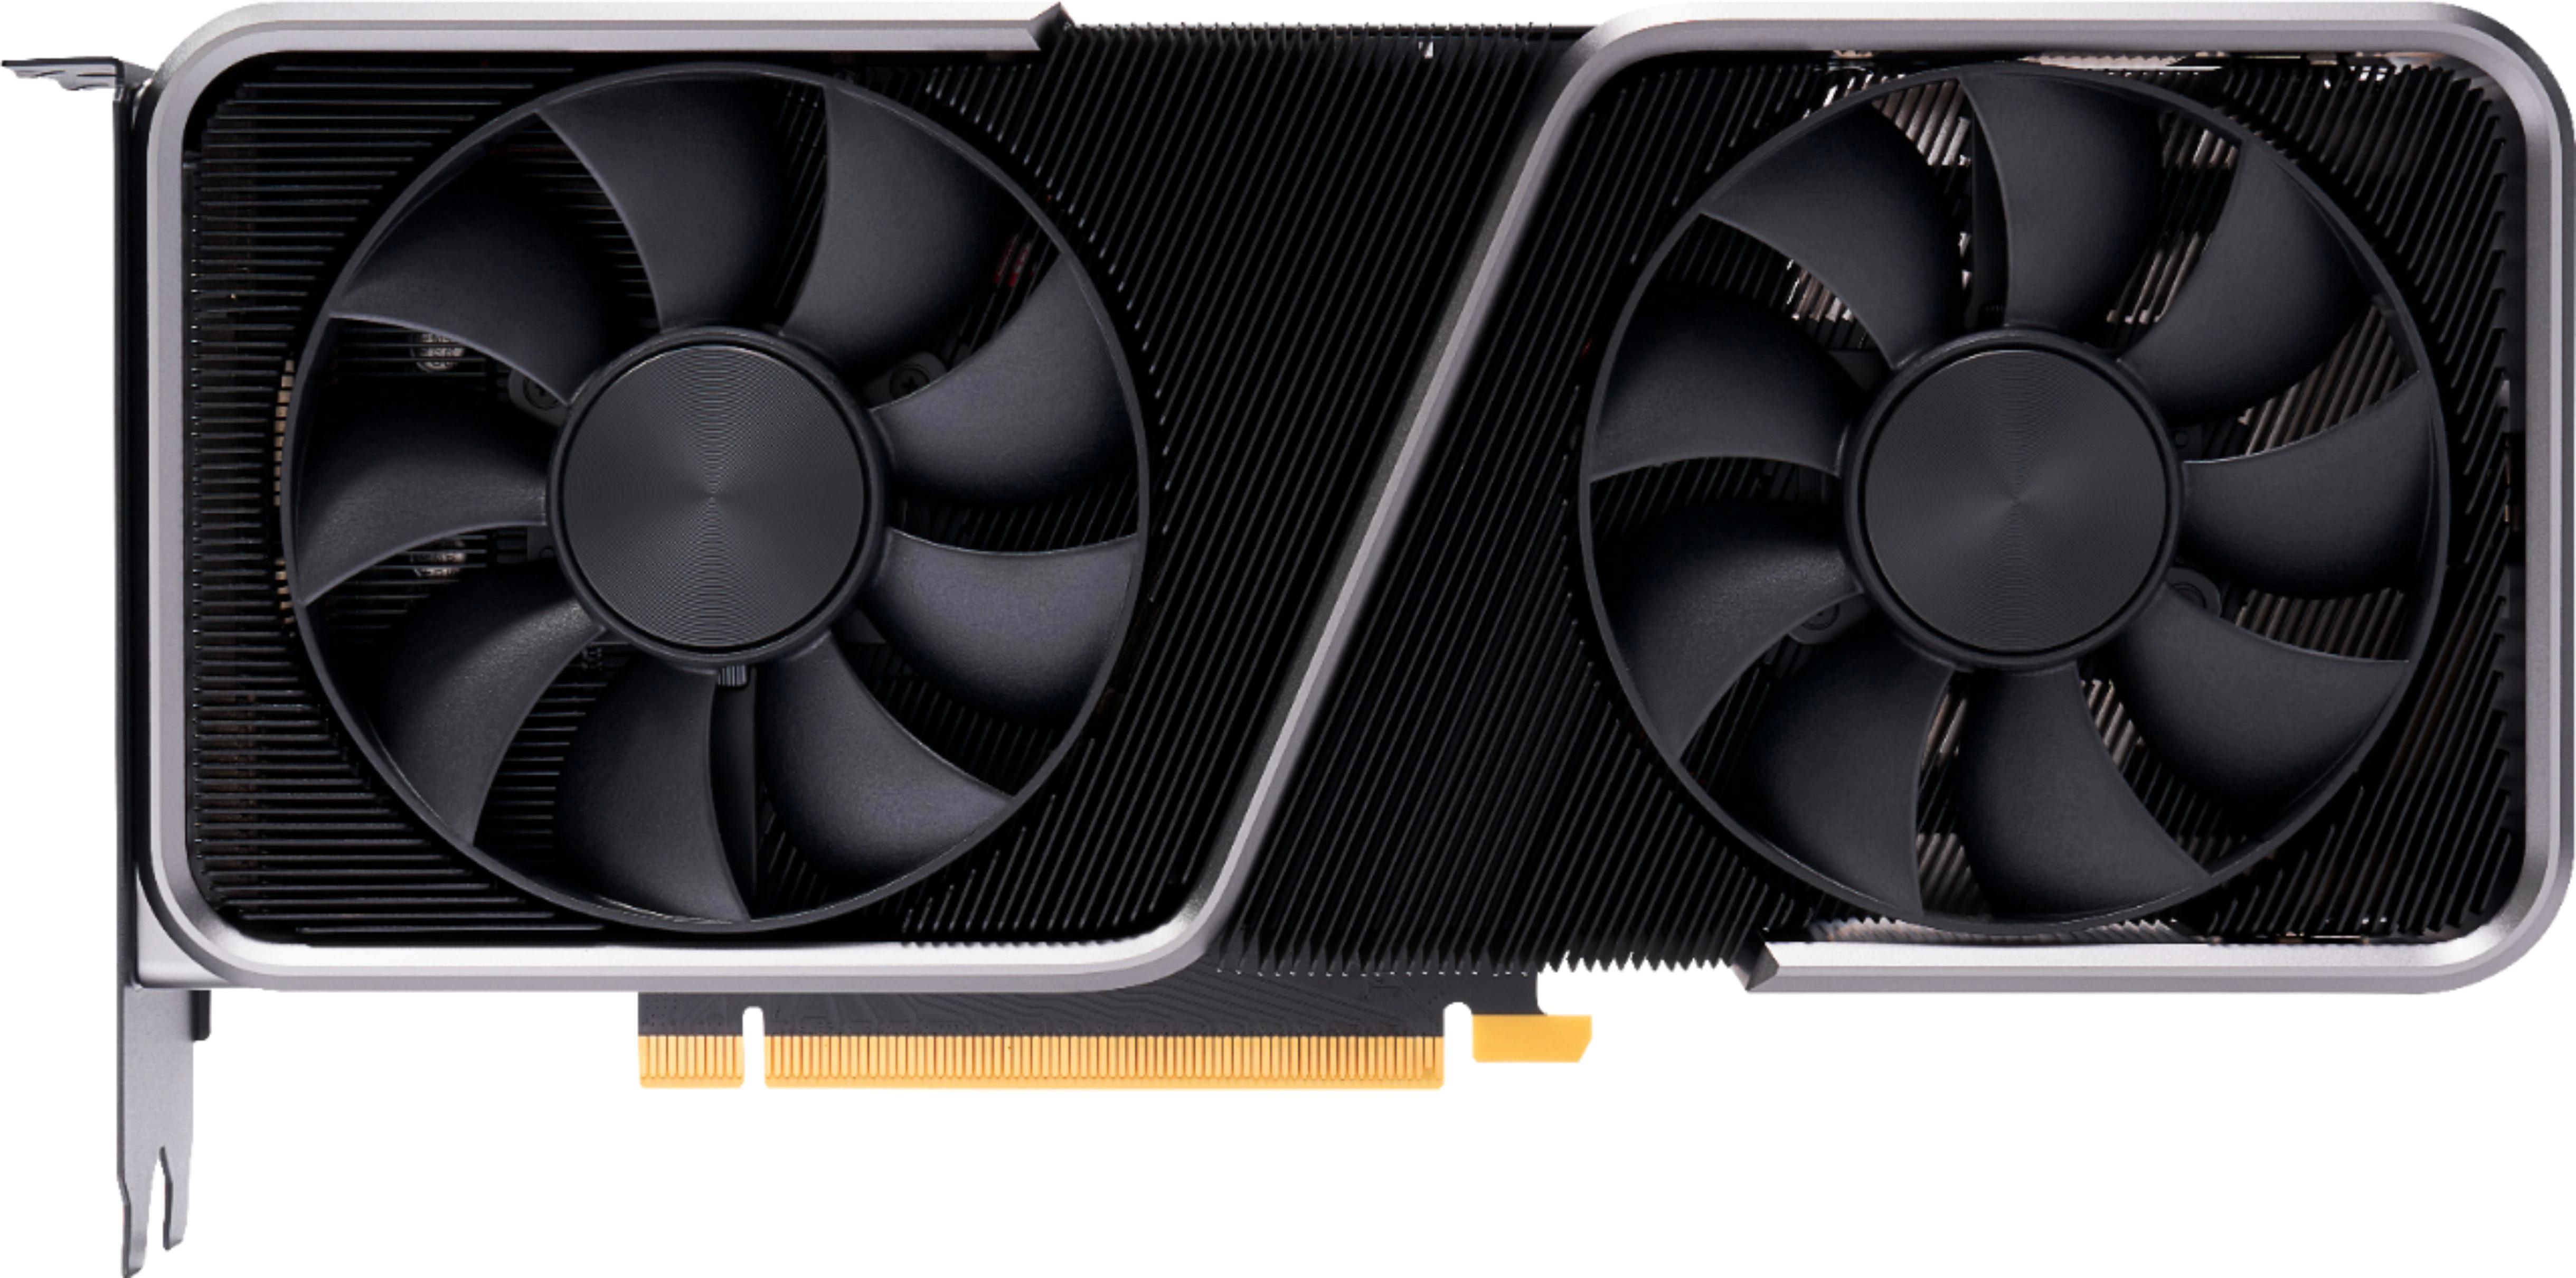 Nvidia GeForce RTX 3070 8GB GDDR6 PCI Express Graphics Card for $499.99 Shipped